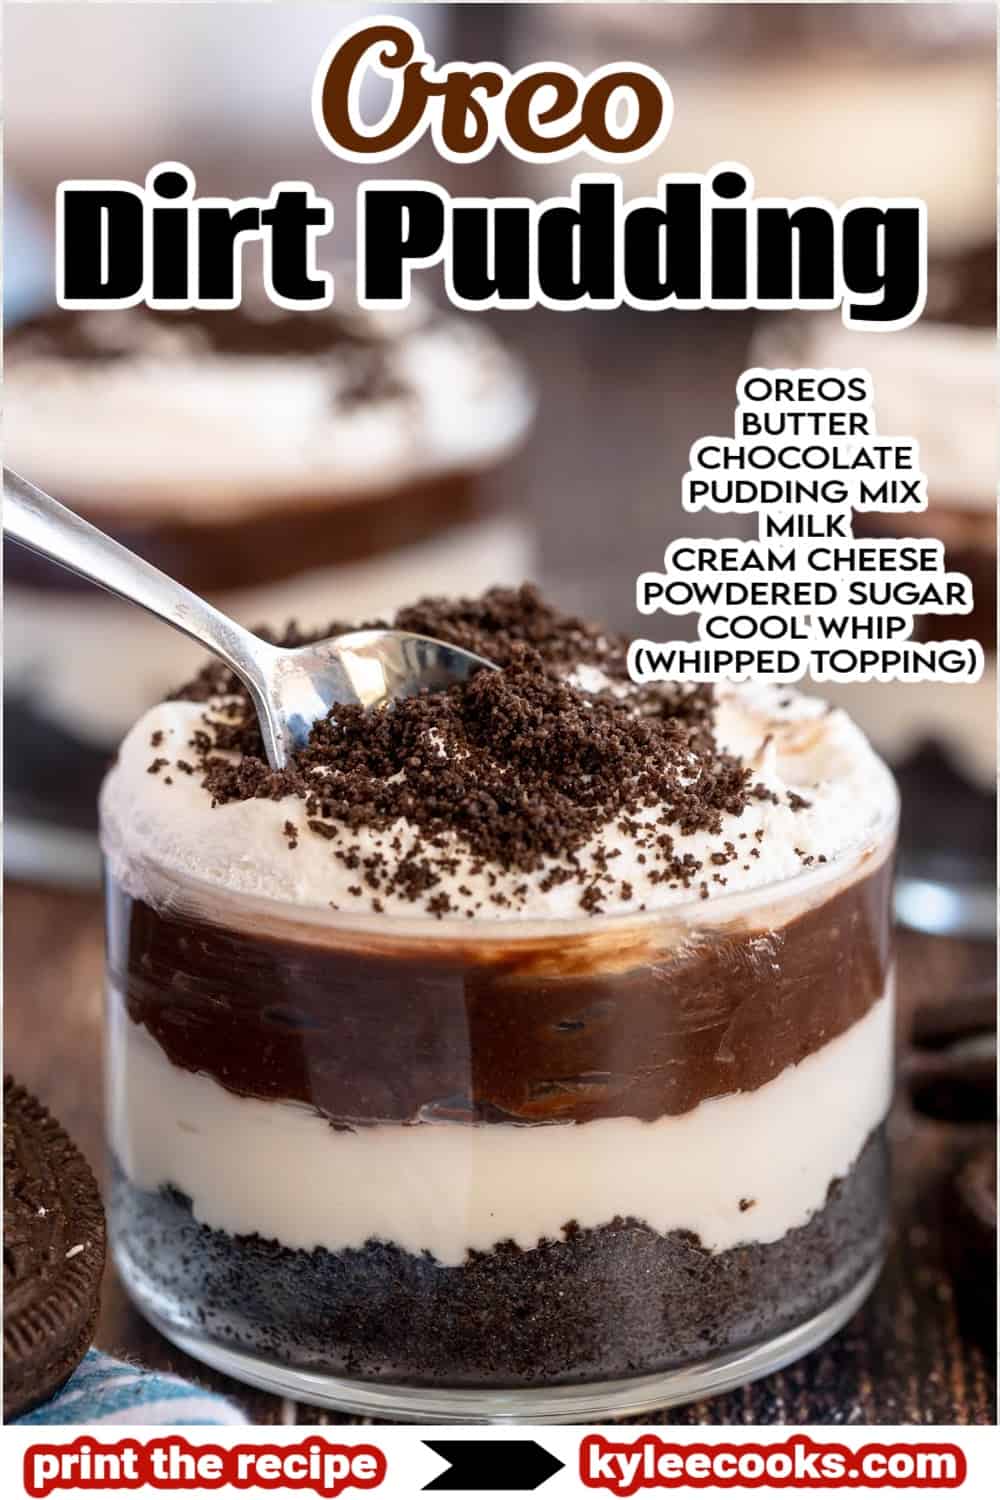 oreo dirt pudding in a glass, with recipe ingredients and title overlaid in text.